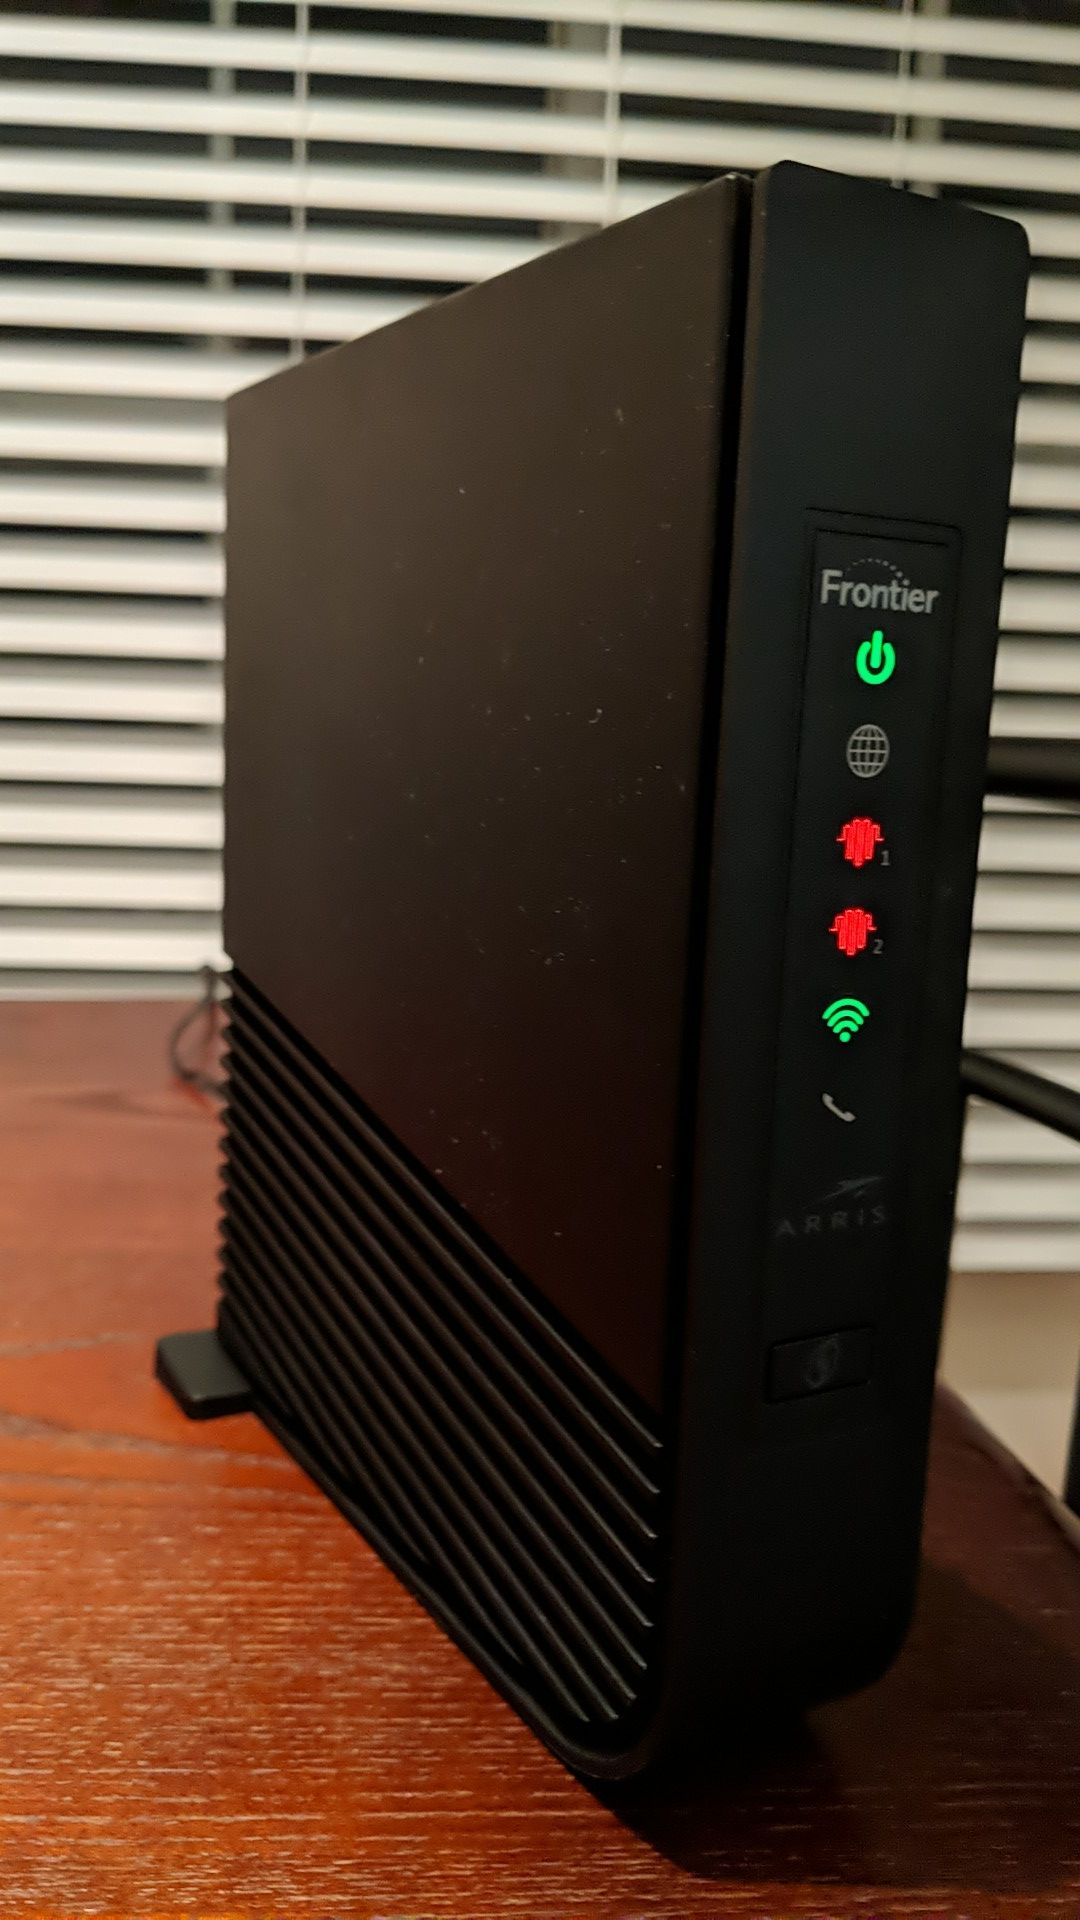 Arris Frontier modem router Dual band 2.5GHz and 5 GHz